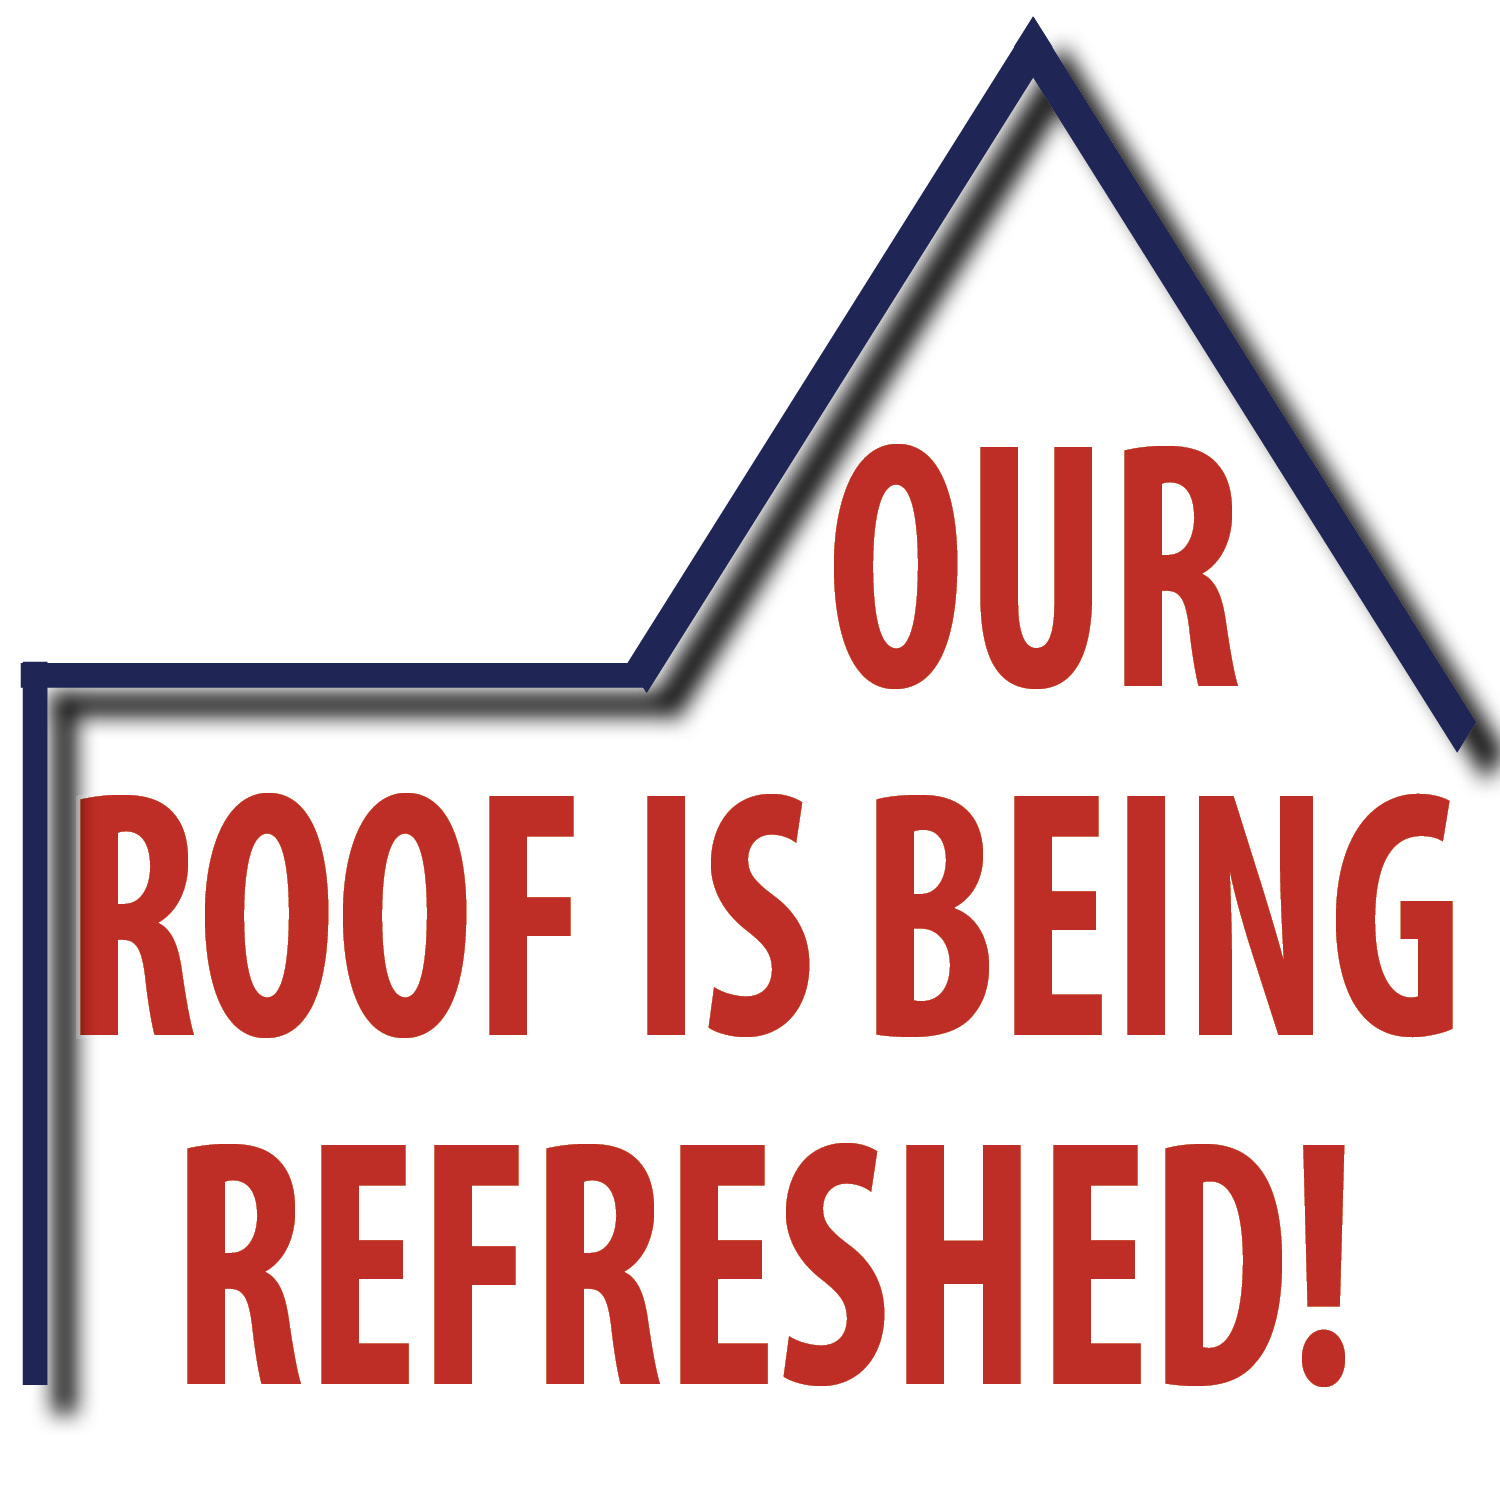 Roof improvement will occur during August